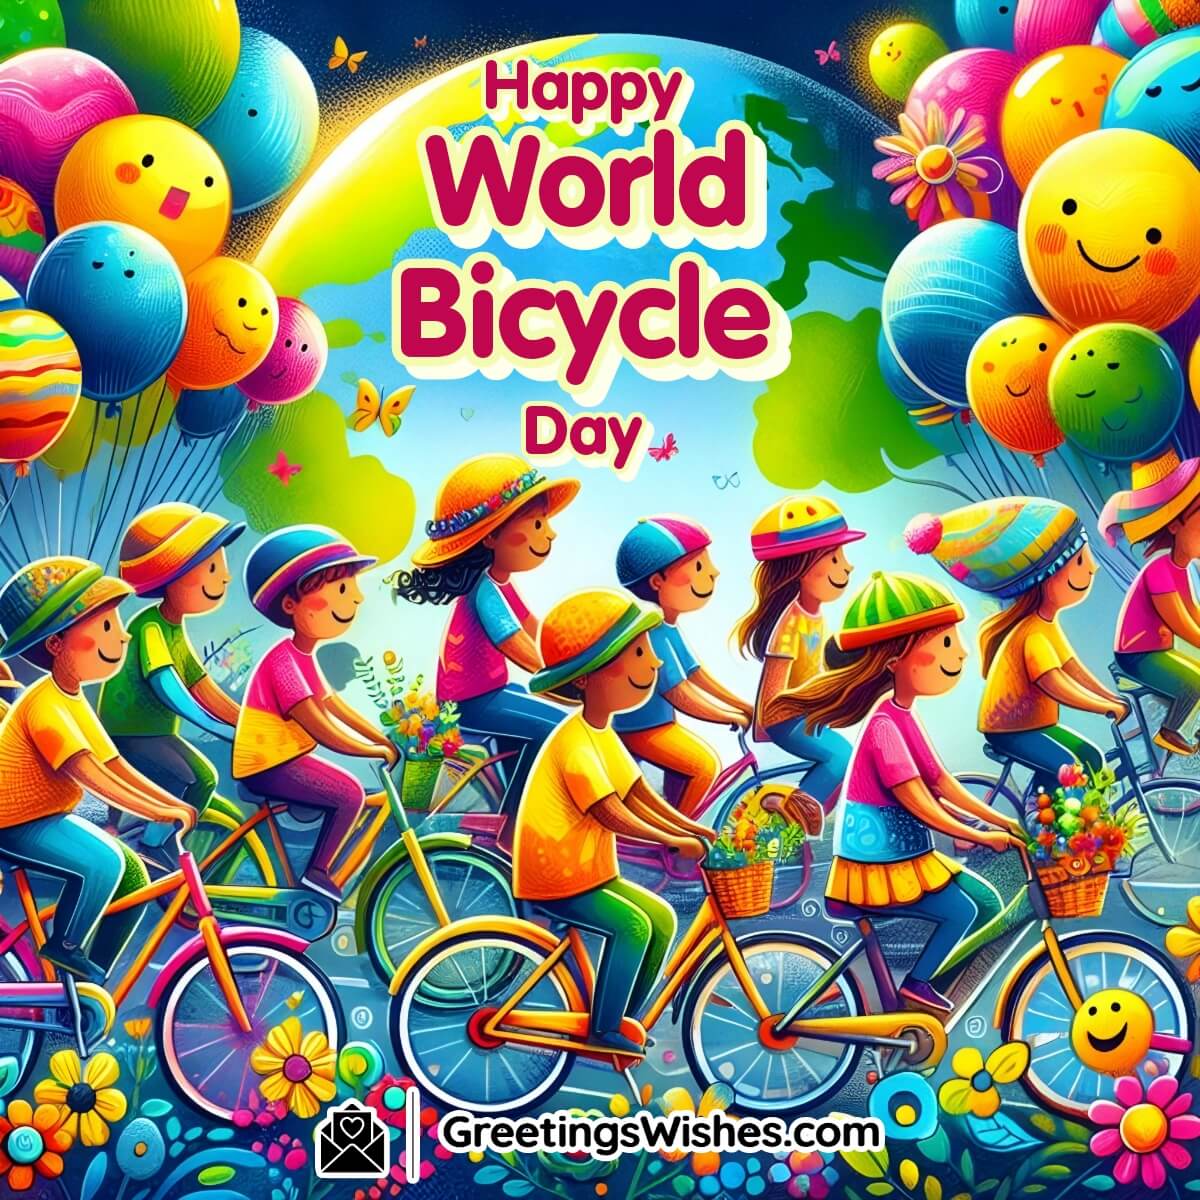 Happy World Bicycle Day